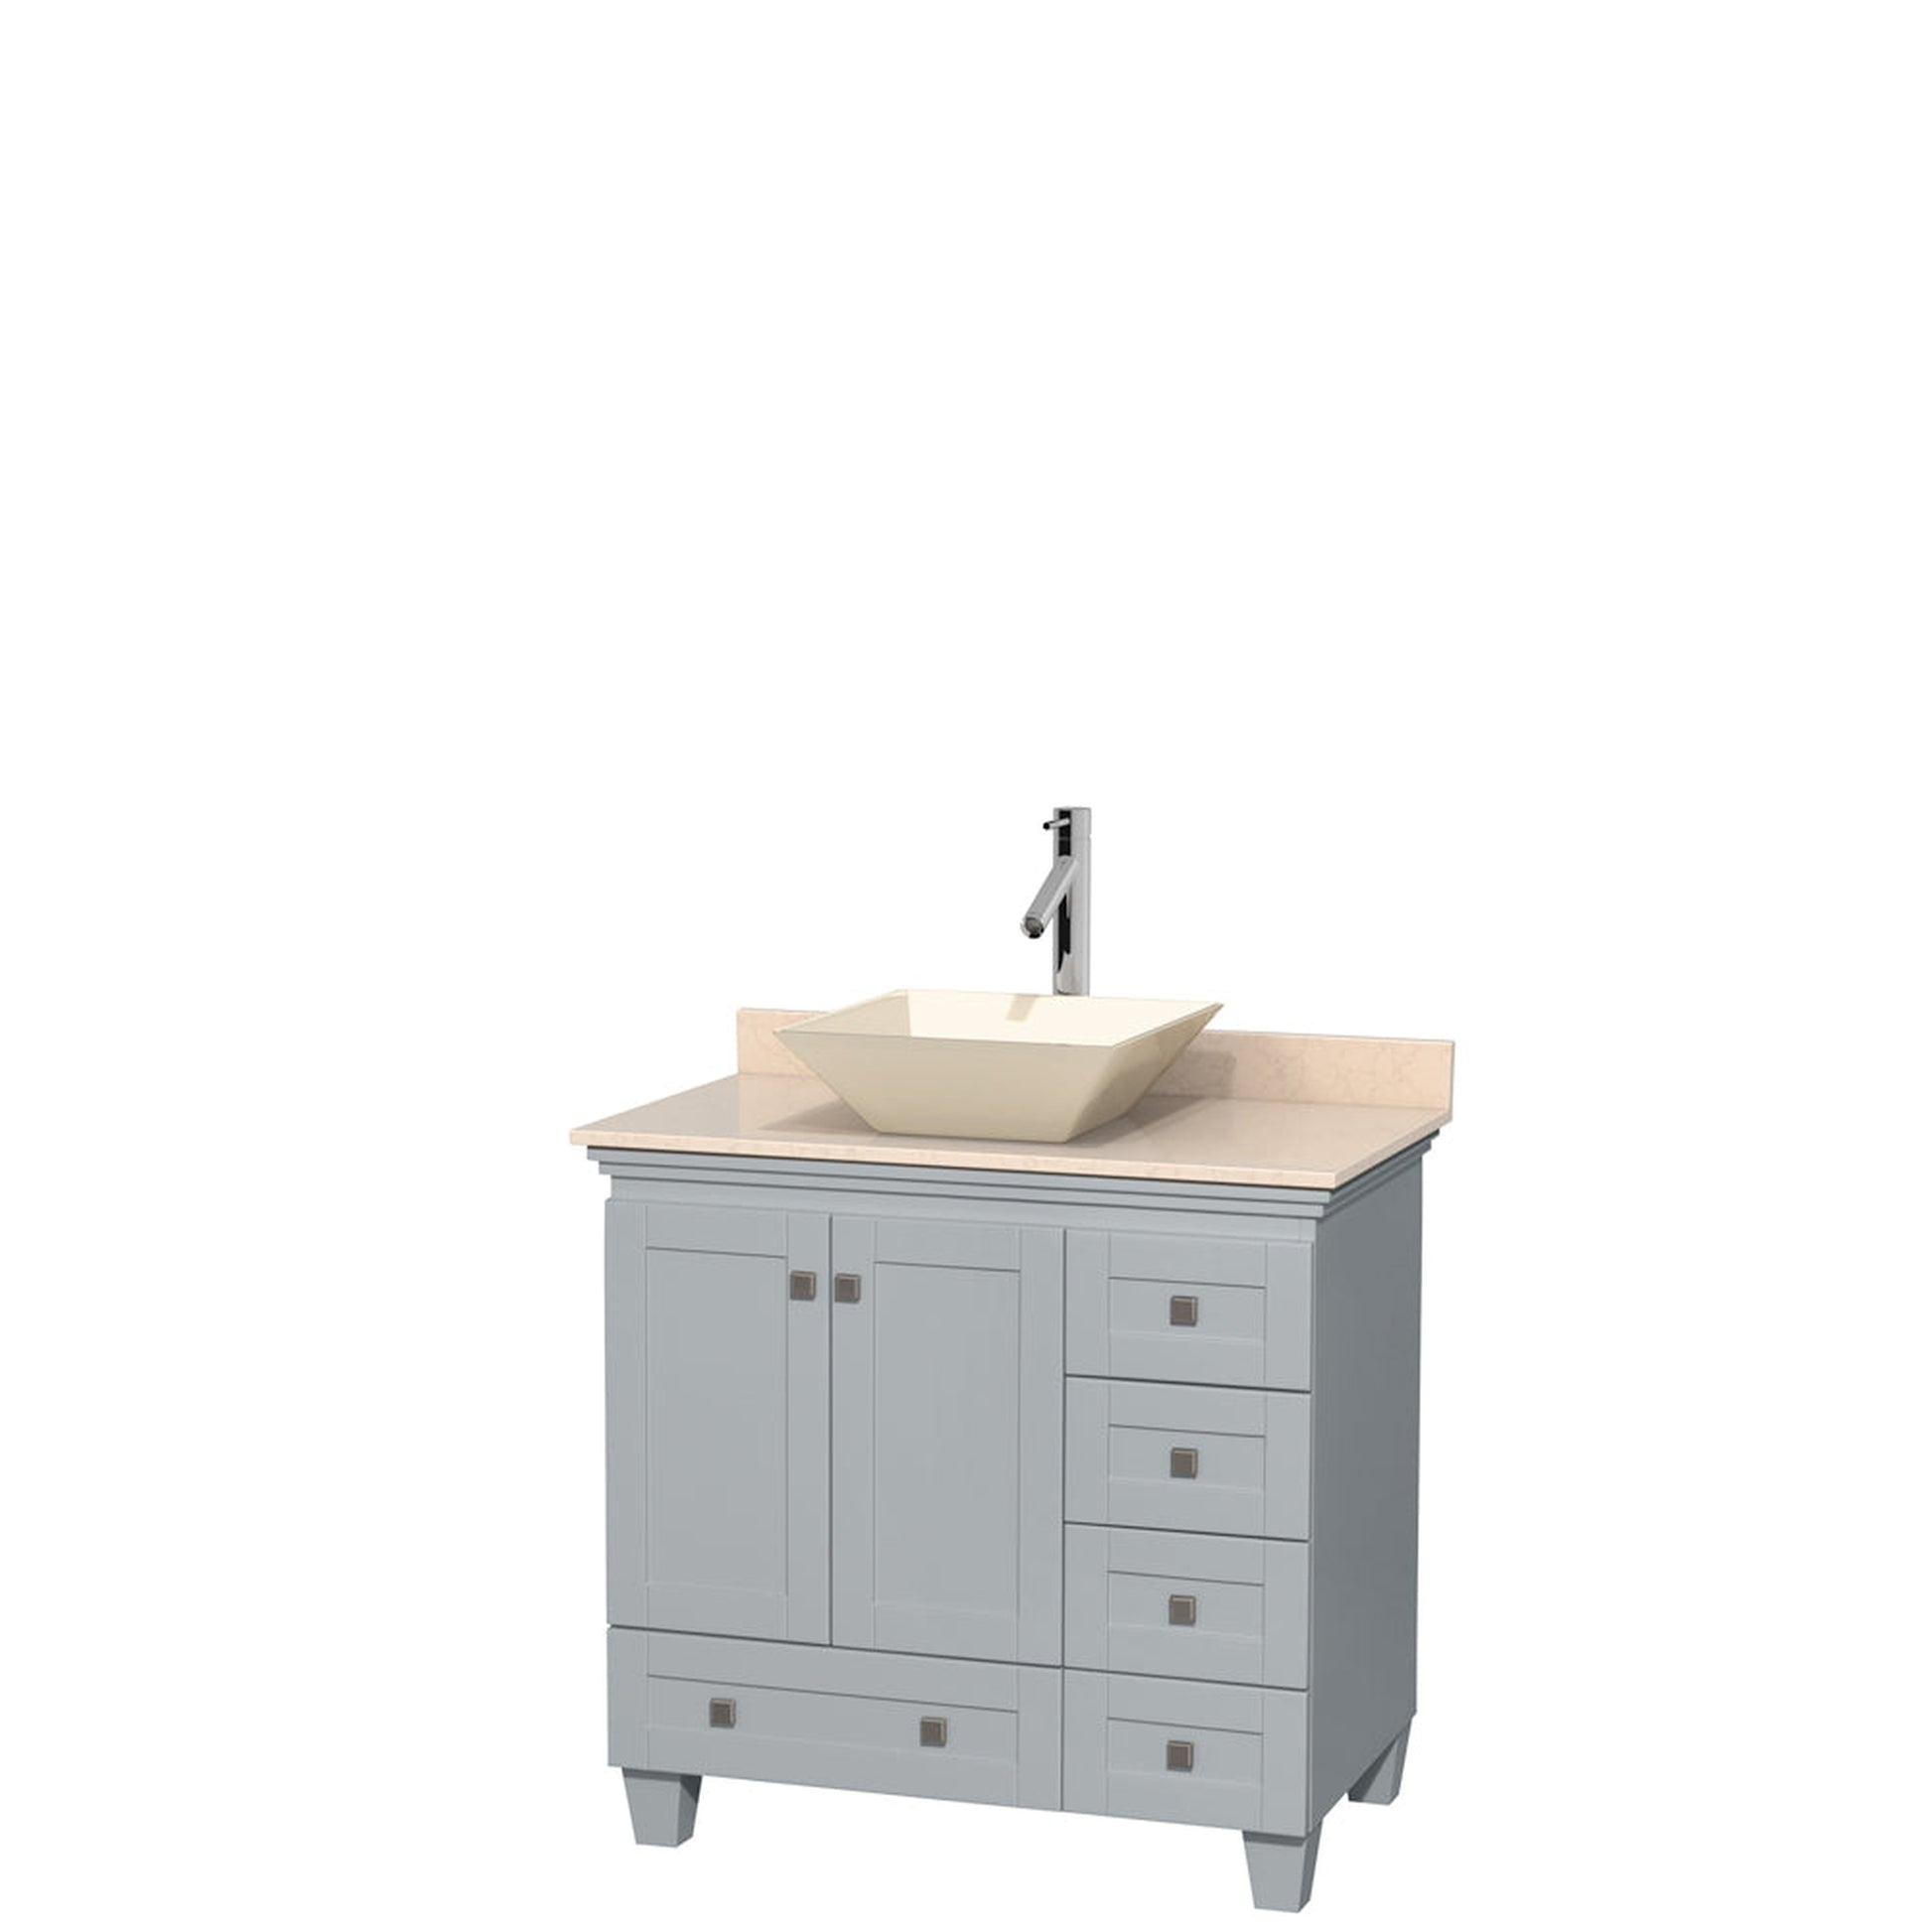 Wyndham Collection Acclaim 36" Single Bathroom Vanity in Oyster Gray With Ivory Marble Countertop & Pyra Bone Porcelain Sink